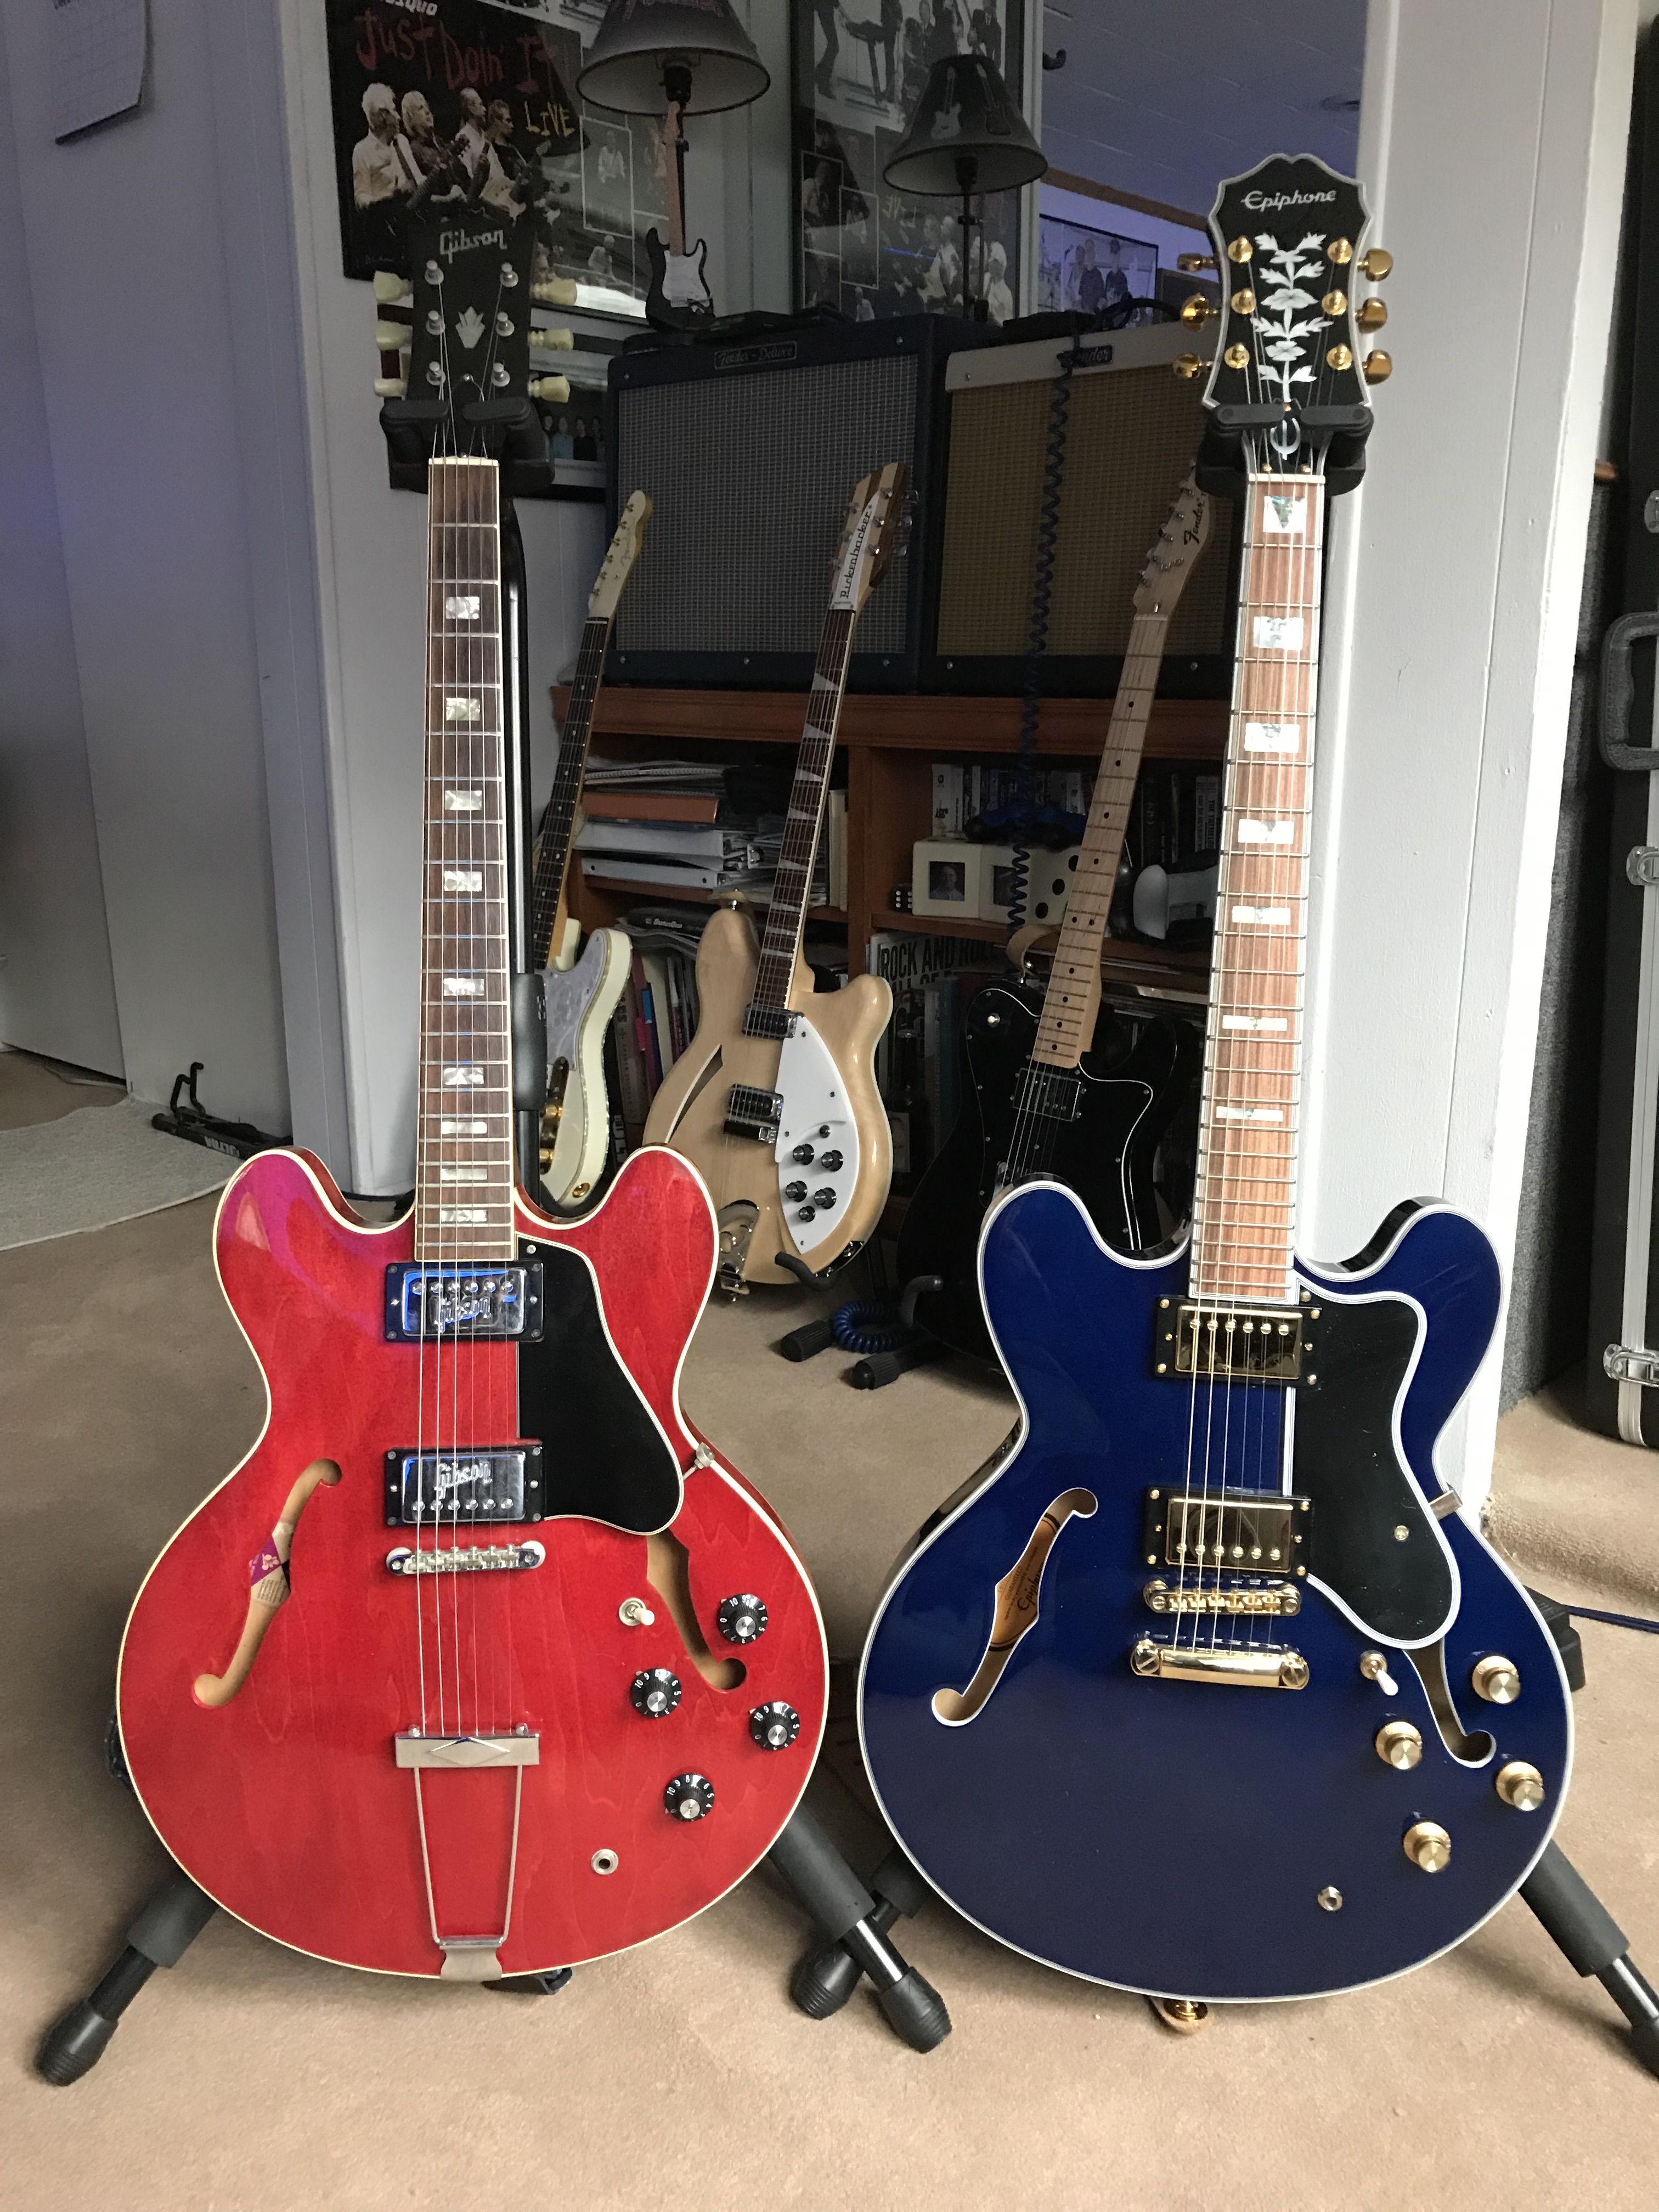 Semi Hollow Body Heaven Gibson Es335 And EpiPhone Sheraton With